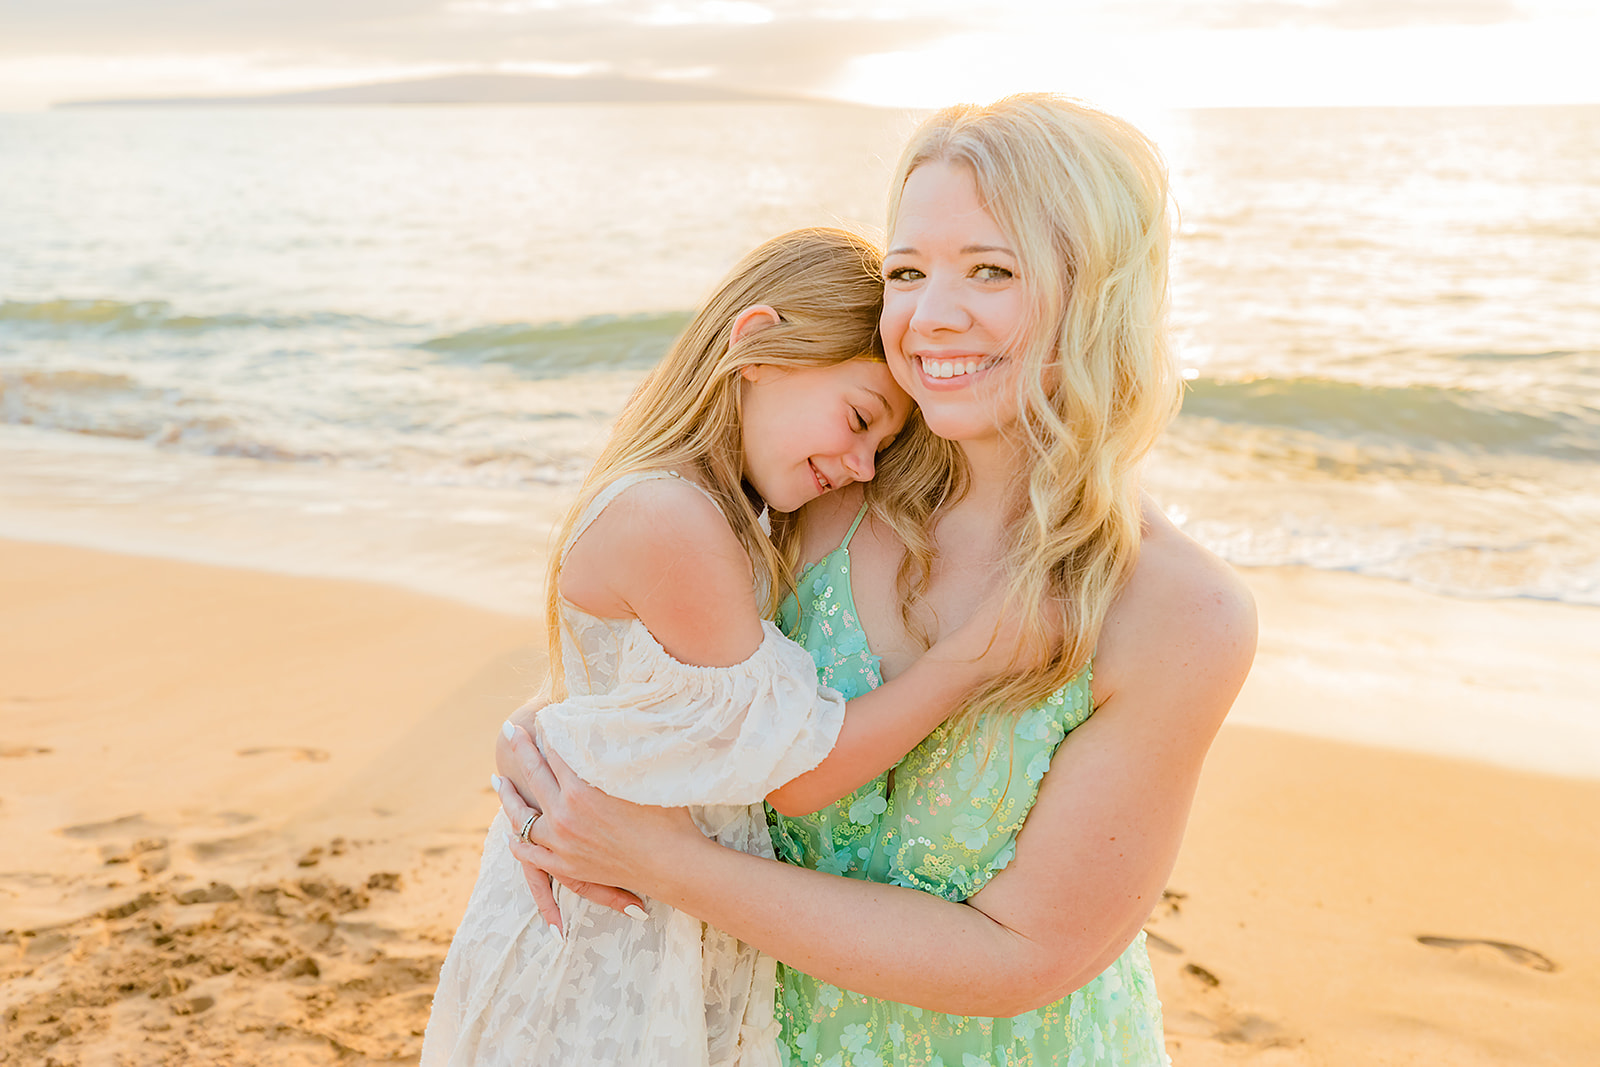 mother and daughter hugging on the beach in maui hawaii at sunset during a photoshoot